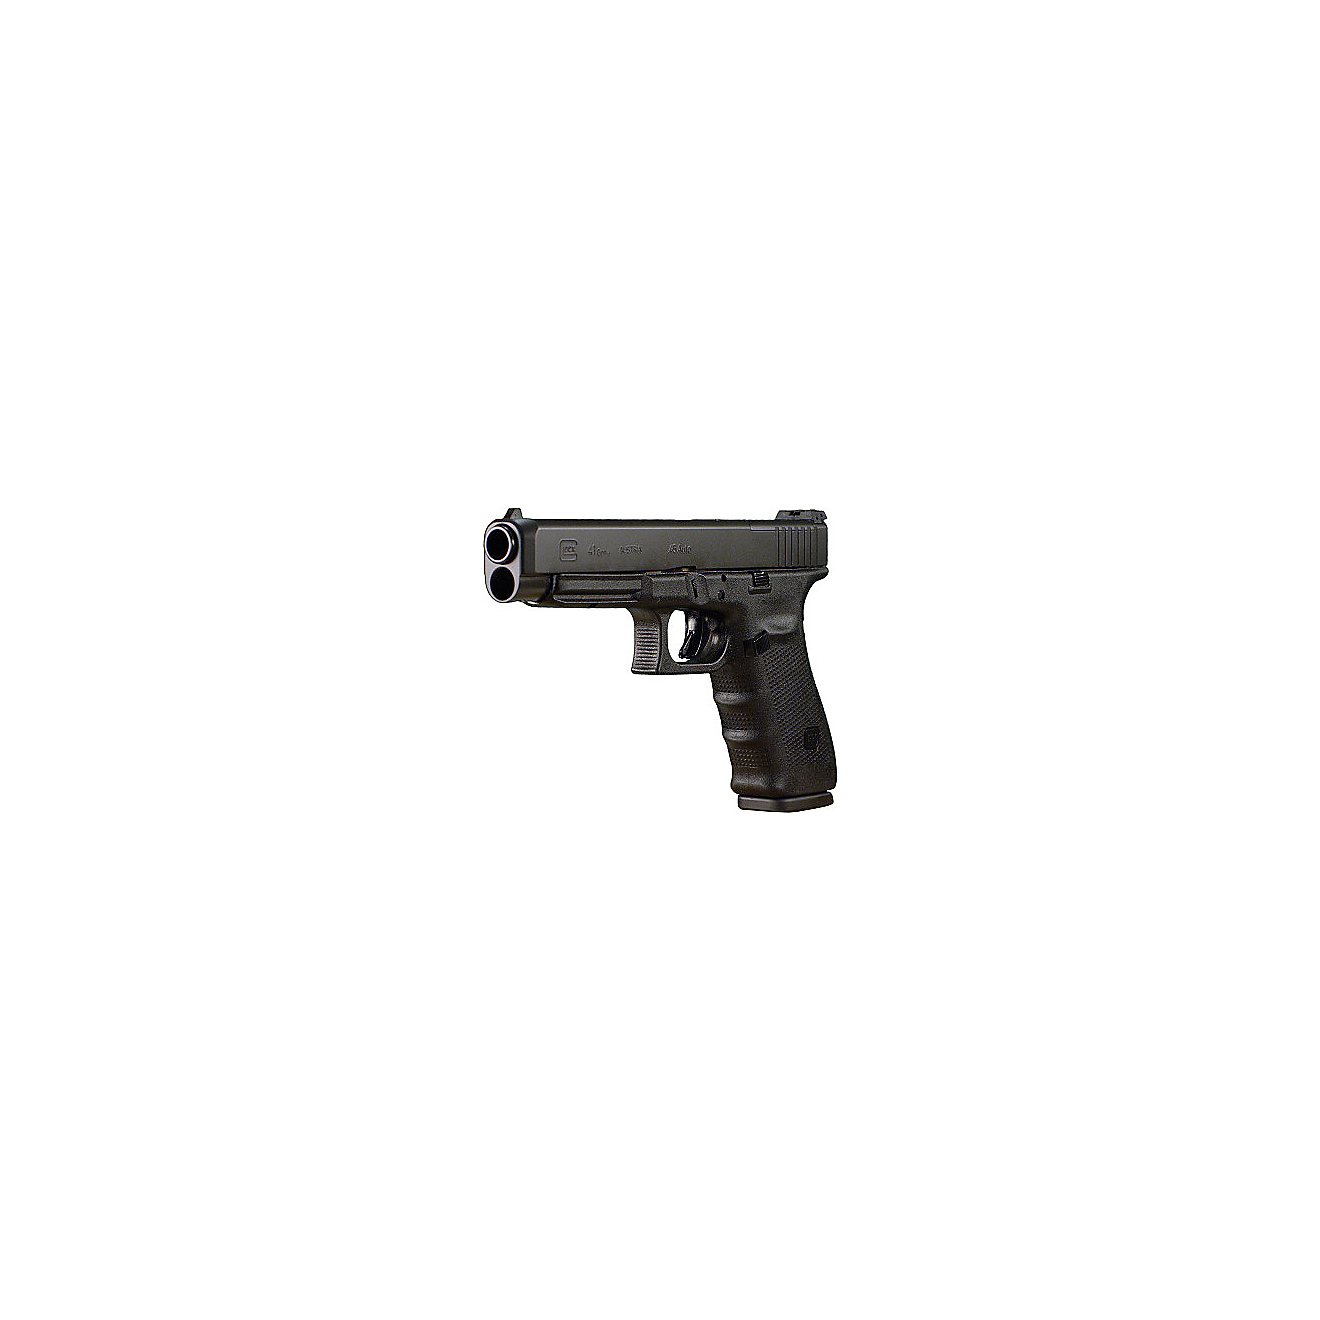 GLOCK 41 - G41 Gen4 MOS 45 ACP Full-Sized 13-Round Pistol                                                                        - view number 4